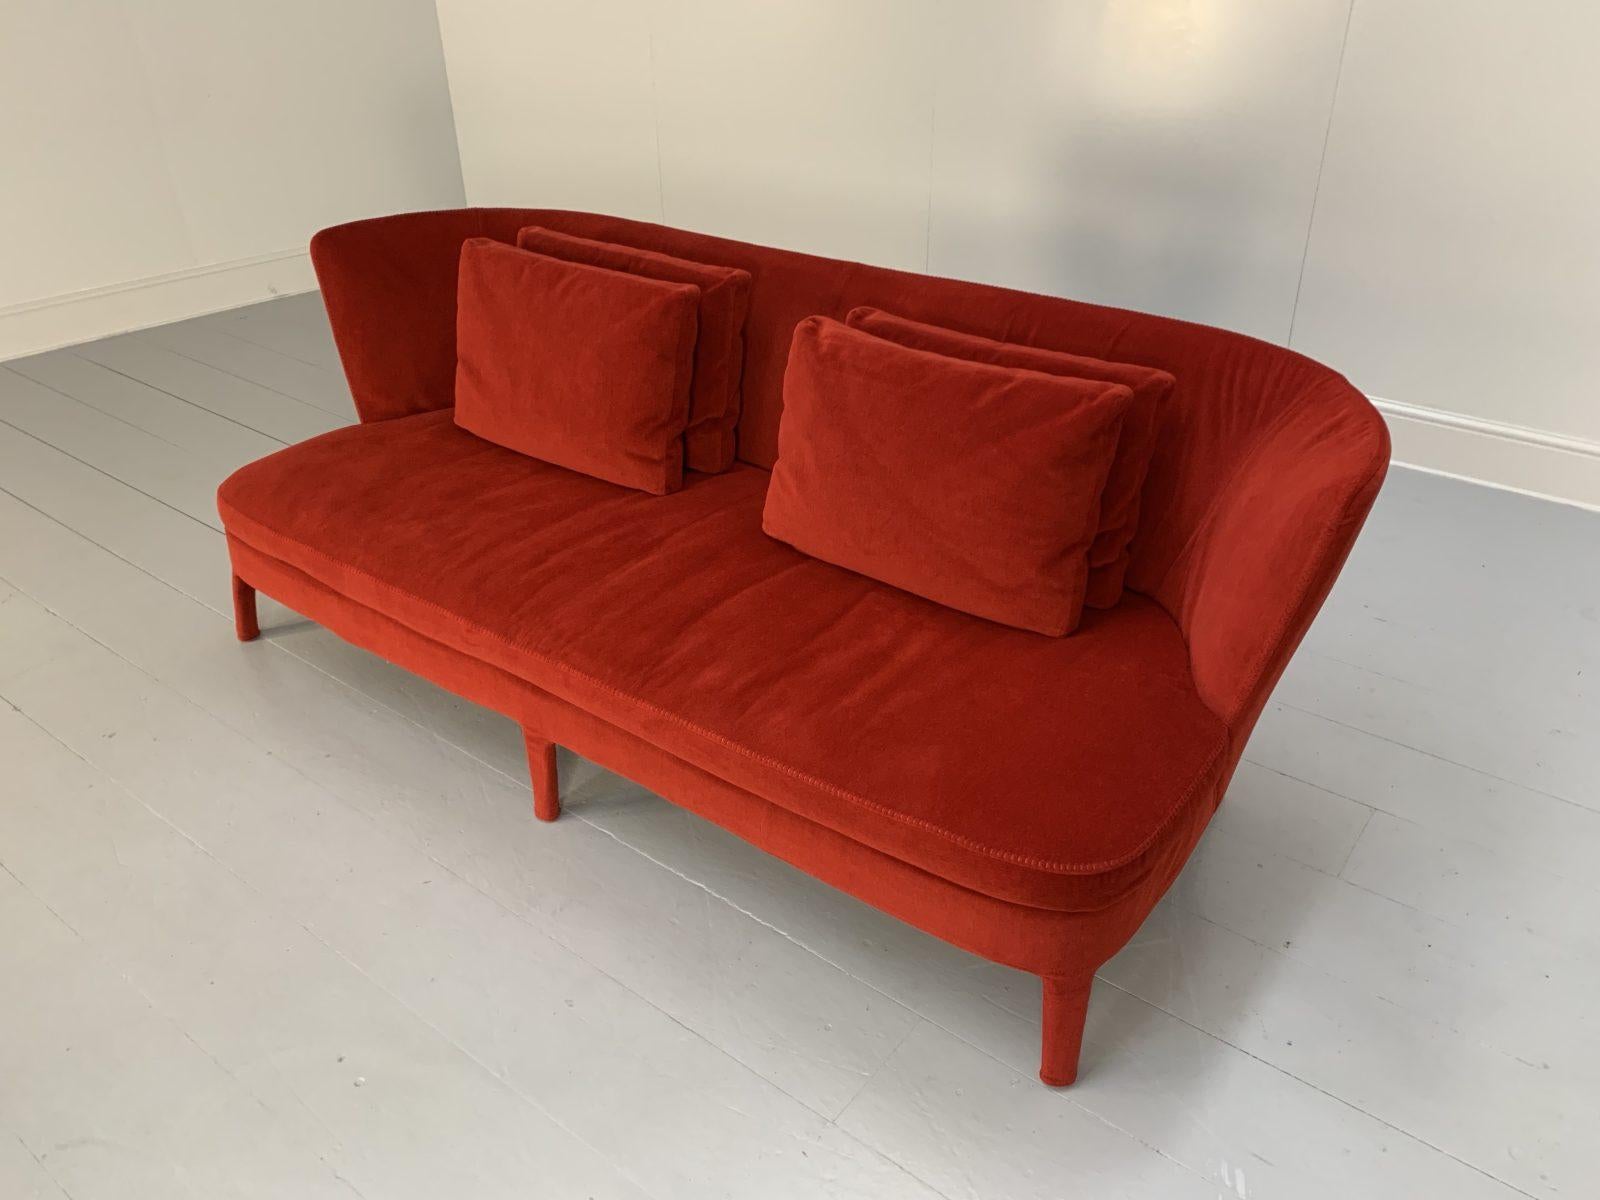 Hello Friends, and welcome to another unmissable offering from Lord Browns Furniture, the UK’s premier resource for fine Sofas and Chairs.

On offer on this occasion is a superb, rare B&B Italia Maxalto “Febo 2803BCT” 3-Seat Sofa dressed in an